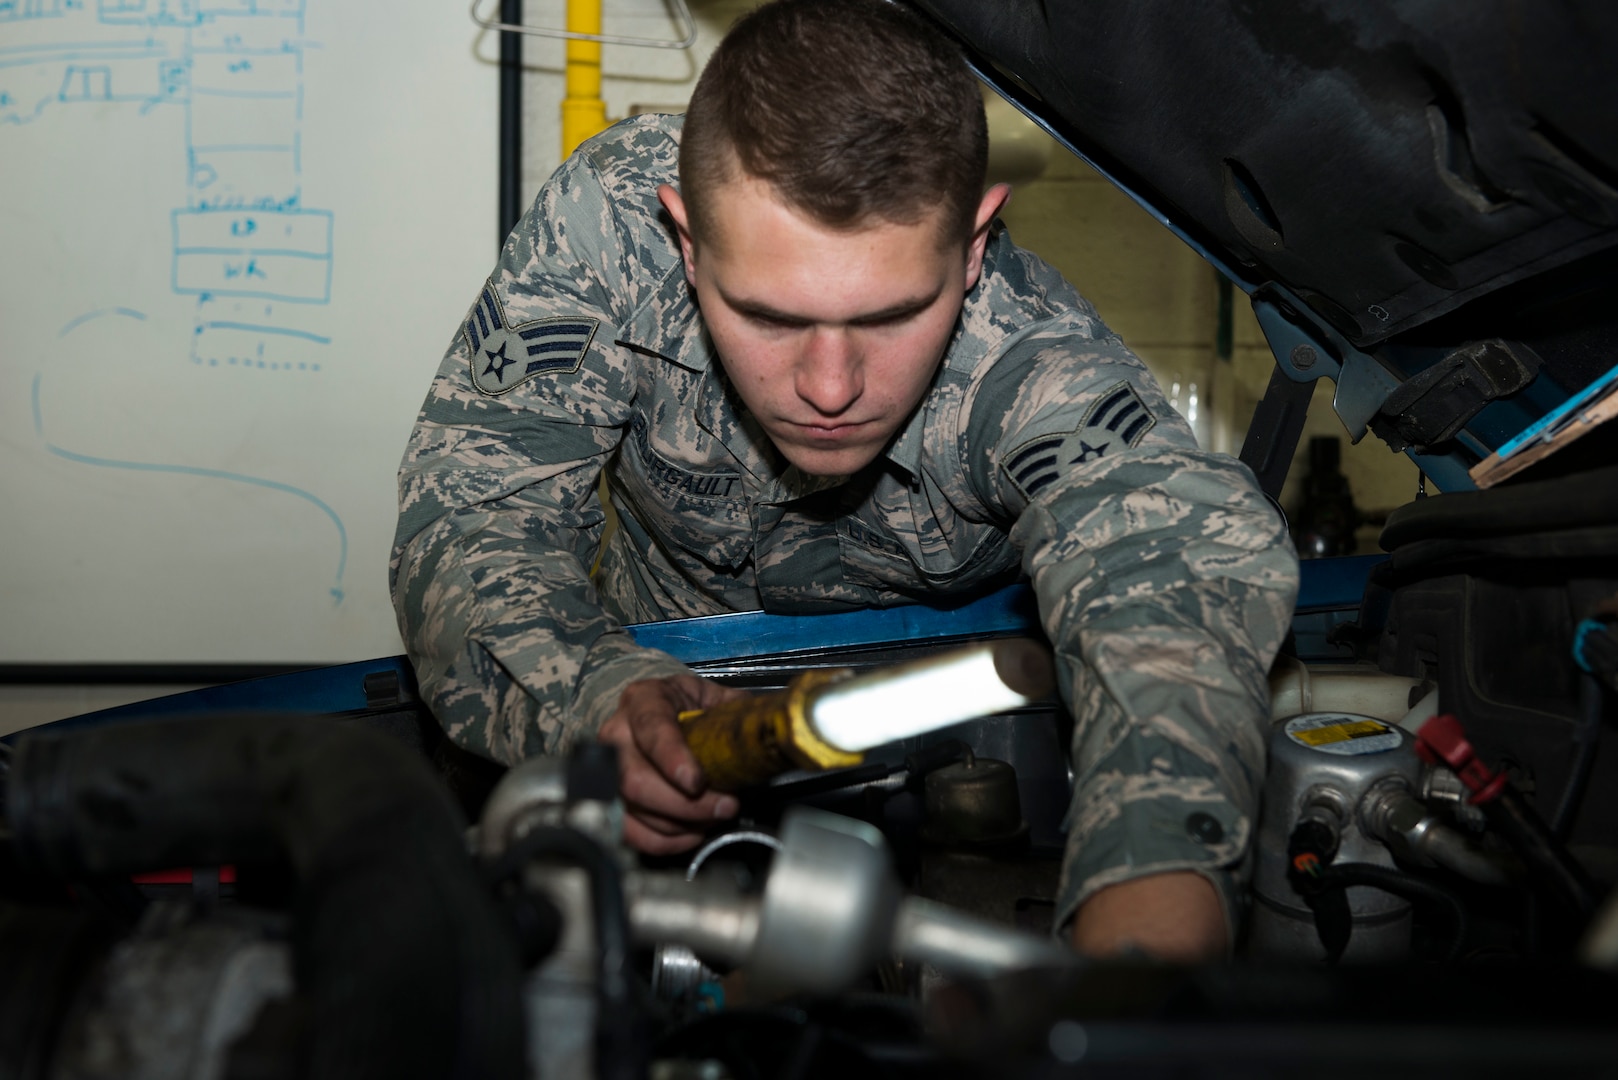 Senior Airman Thomas Bourgault, 103rd Logistics Readiness Squadron vehicle maintenance journeyman, checks under the hood of a pickup truck at Bradley Air National Guard Base, East Granby, Conn. Nov. 3, 2019. Vehicle maintenance specialists perform scheduled maintenance and necessary repairs to Bradley’s entire fleet of vehicles, ensuring readiness of organizations throughout the installation, including aircraft maintenance and fire and emergency services. (U.S. Air National Guard photo by Senior Airman Sadie Hewes)